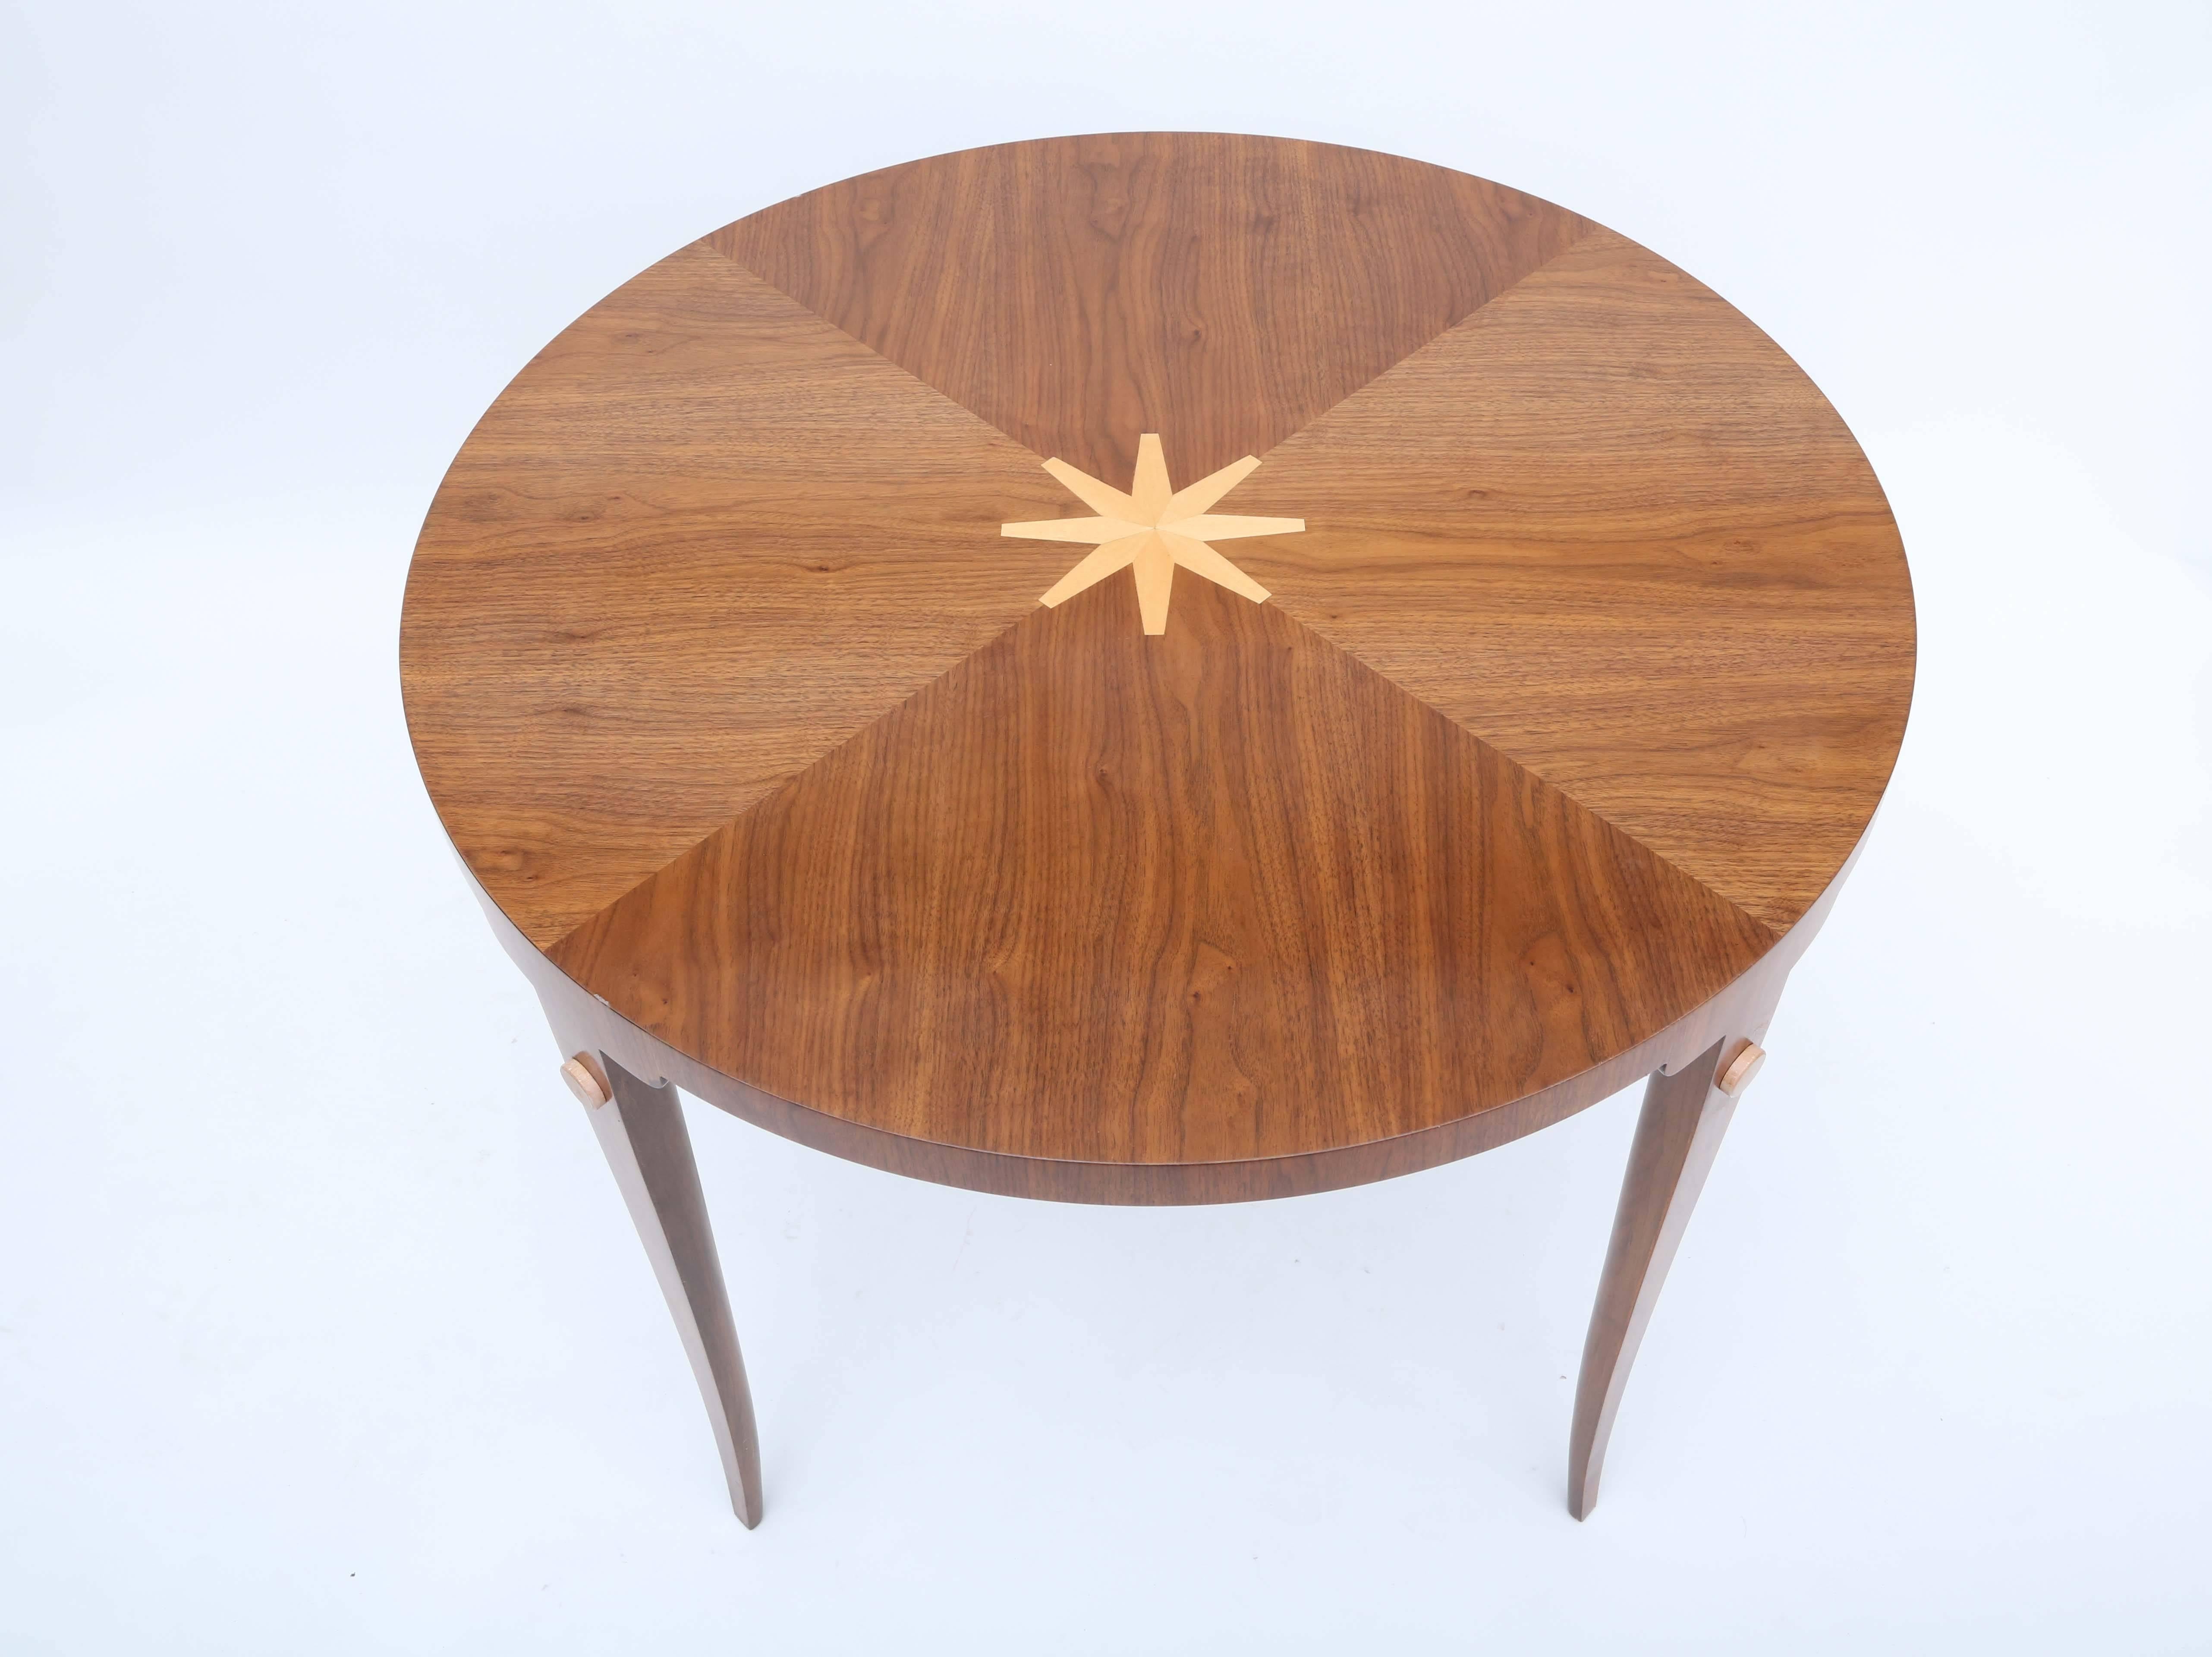 Stunning dining or center table designed by Tommi Parzinger.